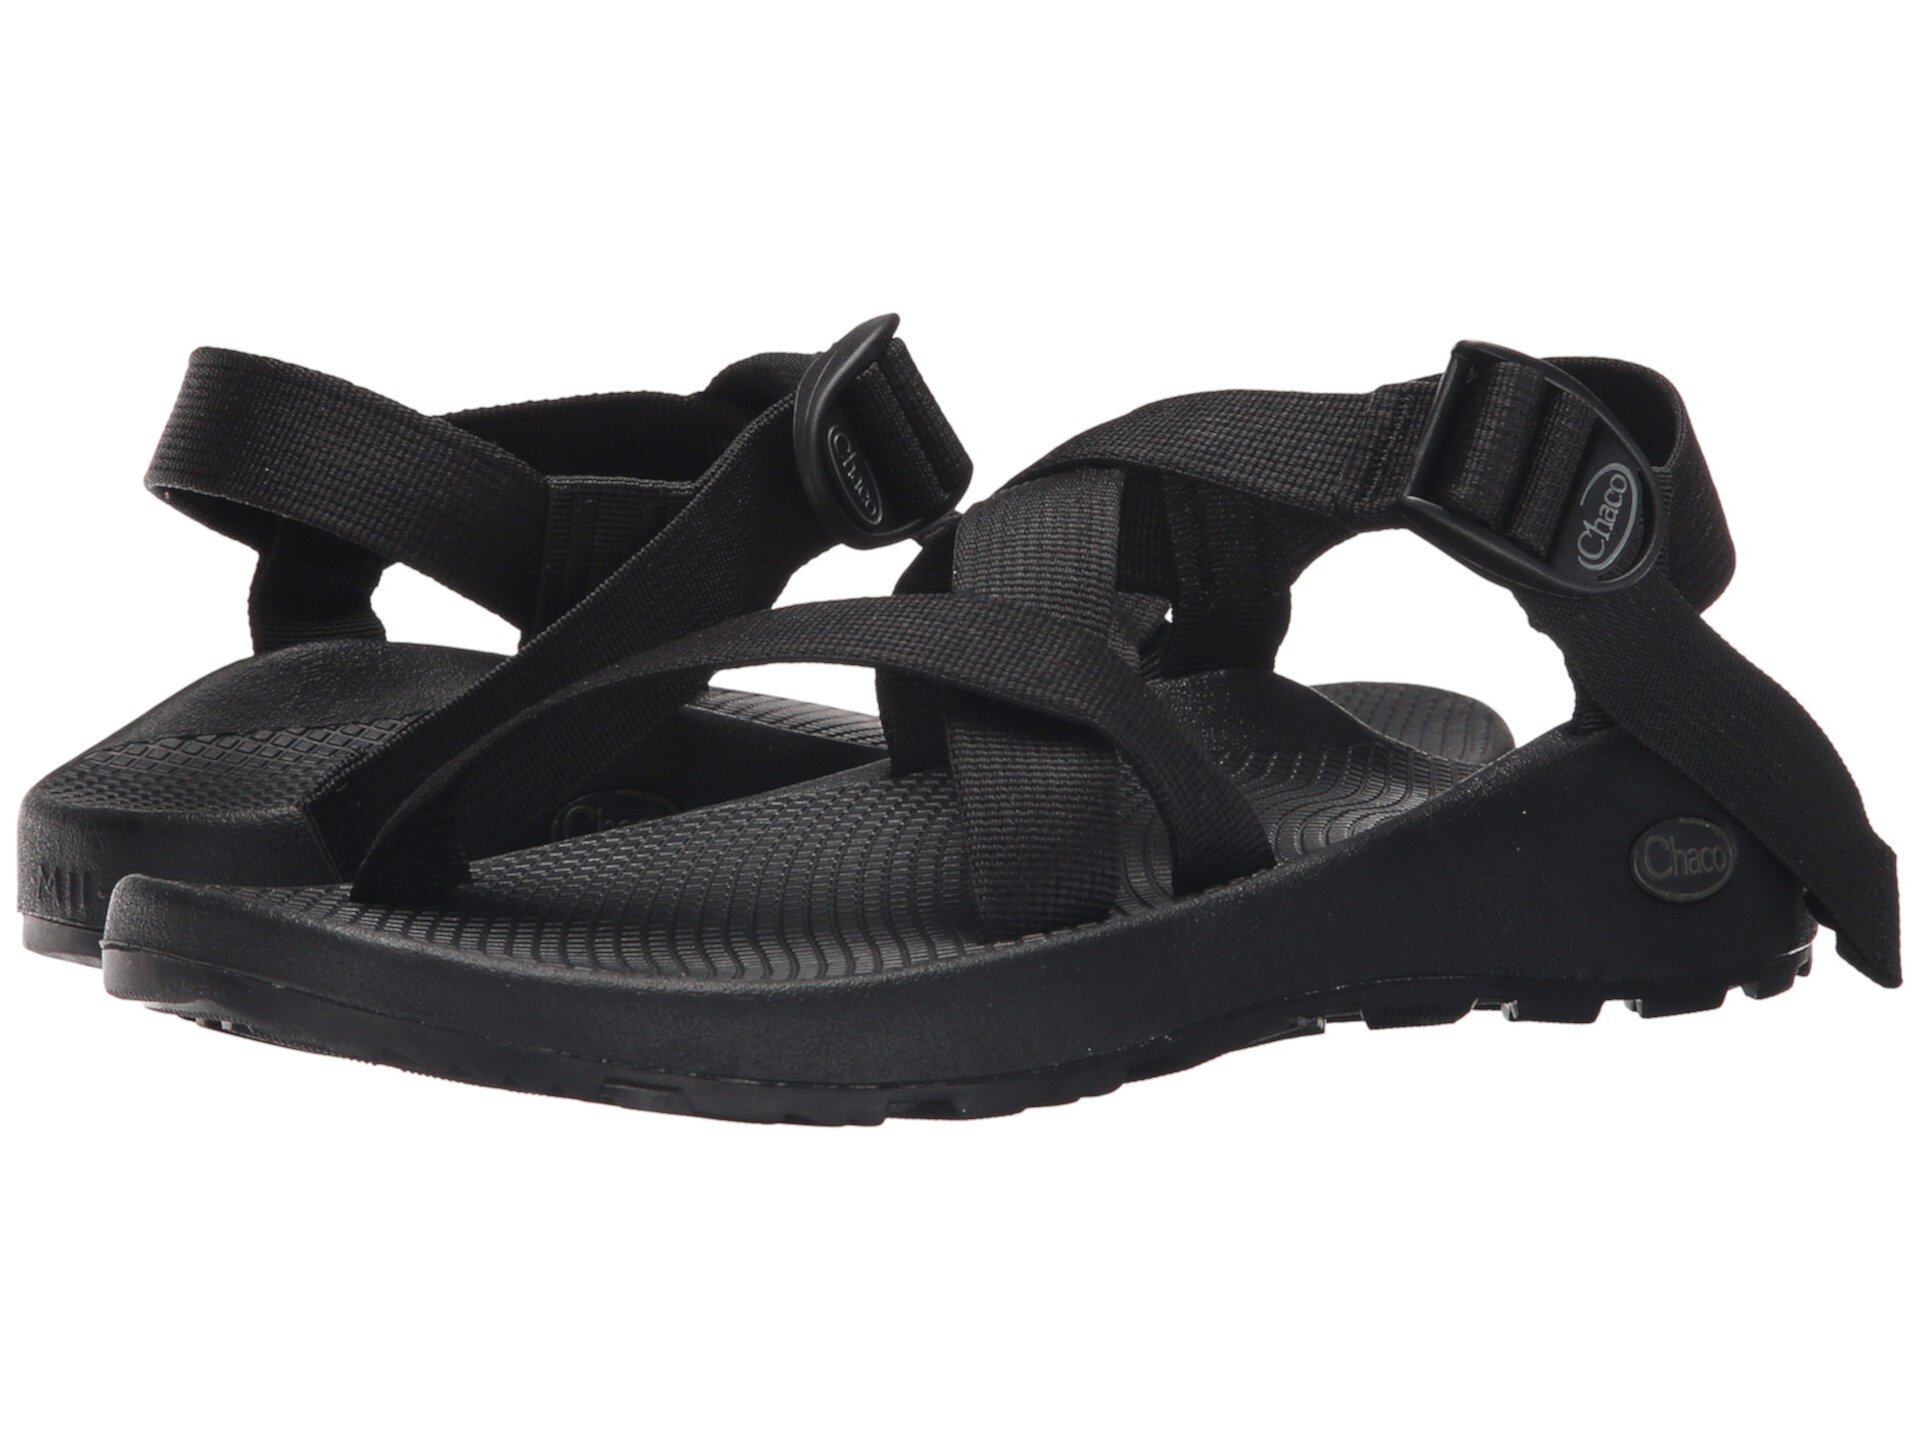 Z / 1® Classic Chaco